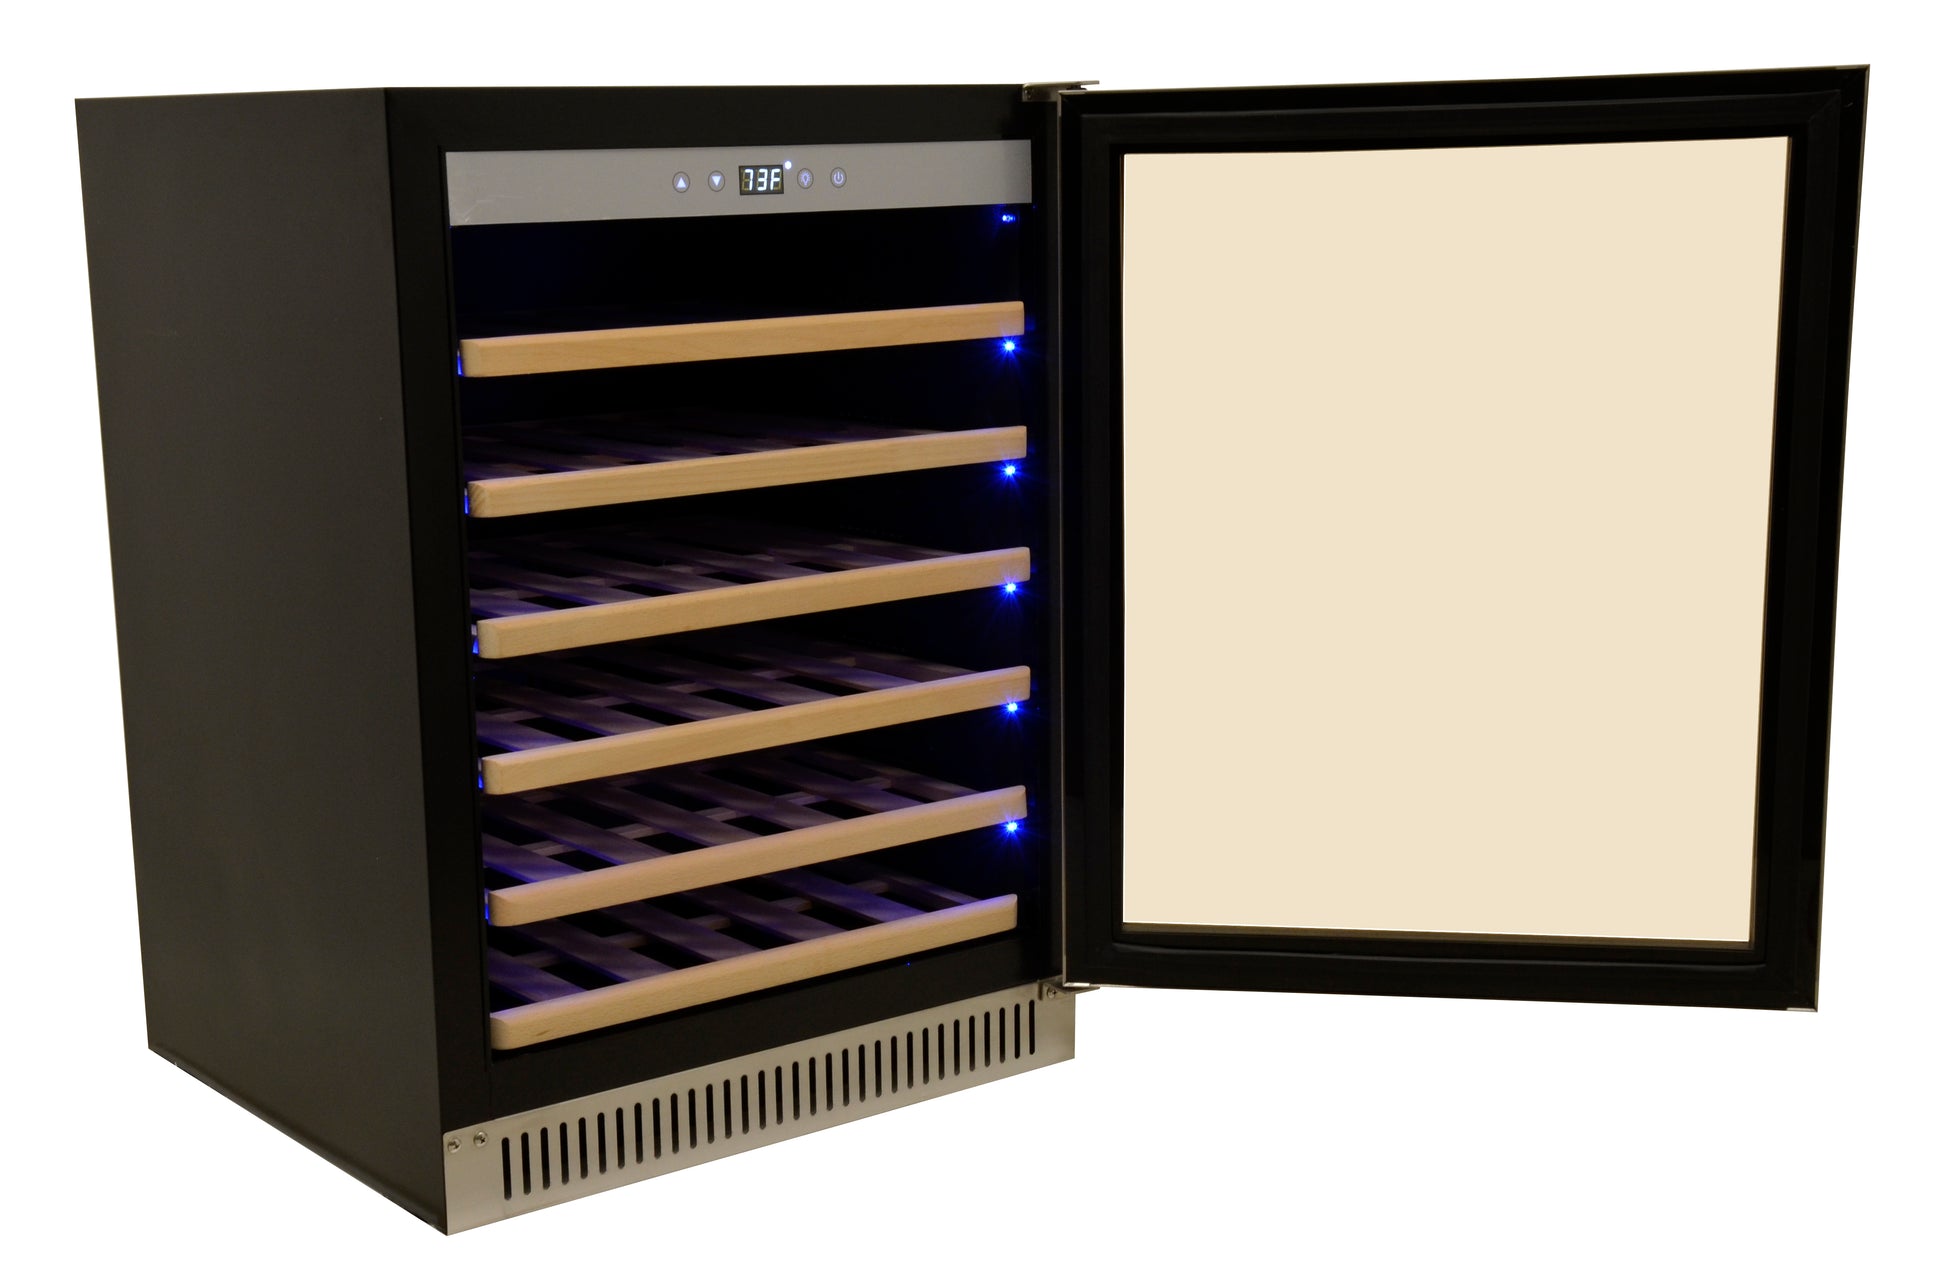 23-INCH SINGLE ZONE WINE COOLER WITH 51 BOTTLE CAPACITY AND STAINLESS STEEL DOOR-Wine Coolers-The Wine Cooler Club